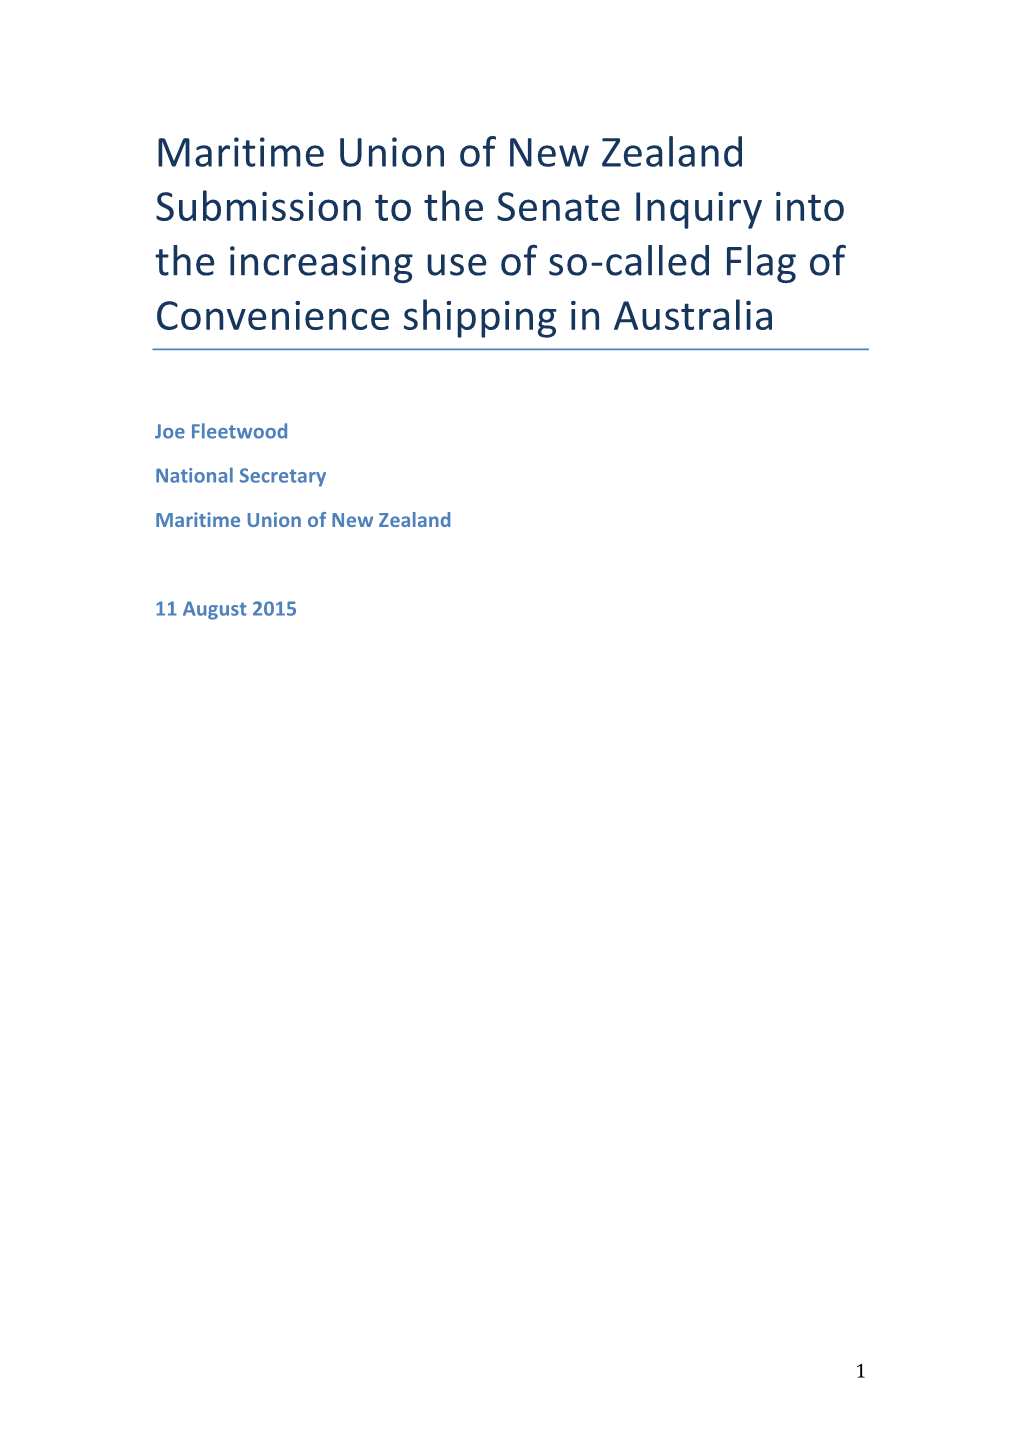 Maritime Union of New Zealand Submission to the Senate Inquiry Into the Increasing Use of So-Called Flag of Convenience Shipping in Australia